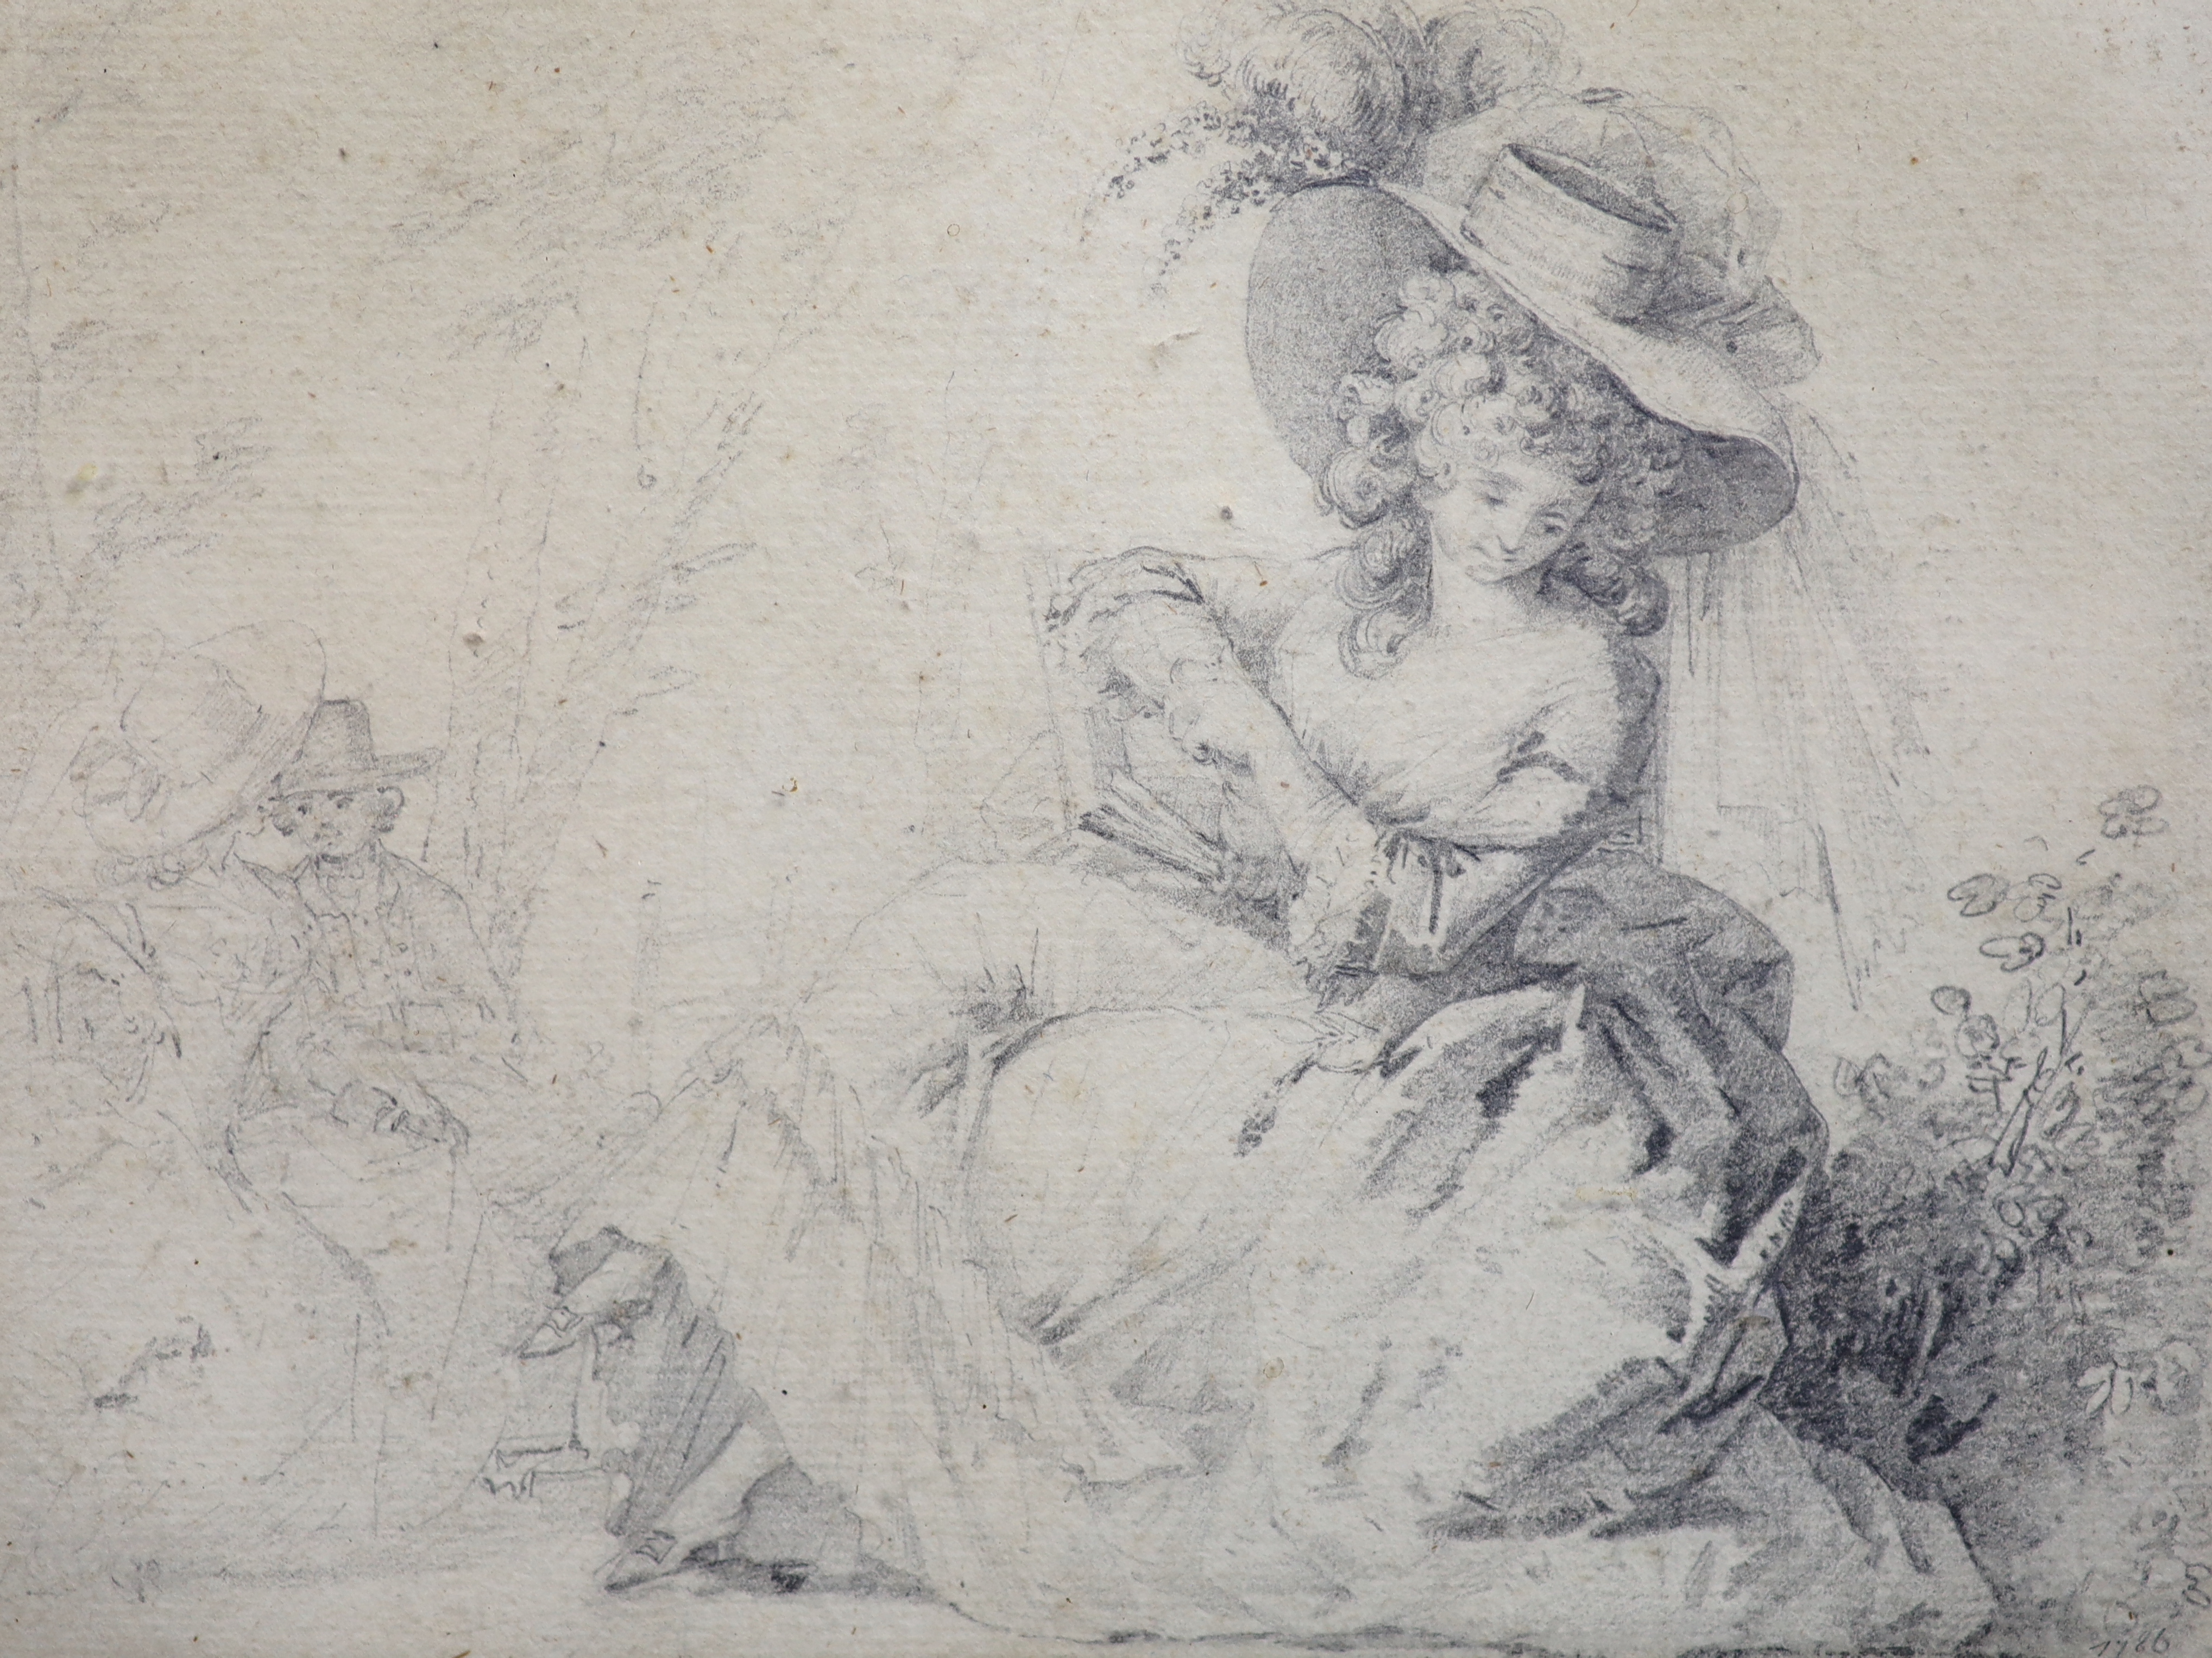 Alexandre Moitte (French, 1750-1828), A lady seated in parkland, further figures beyond, pencil on paper, 15 x 19.75cm